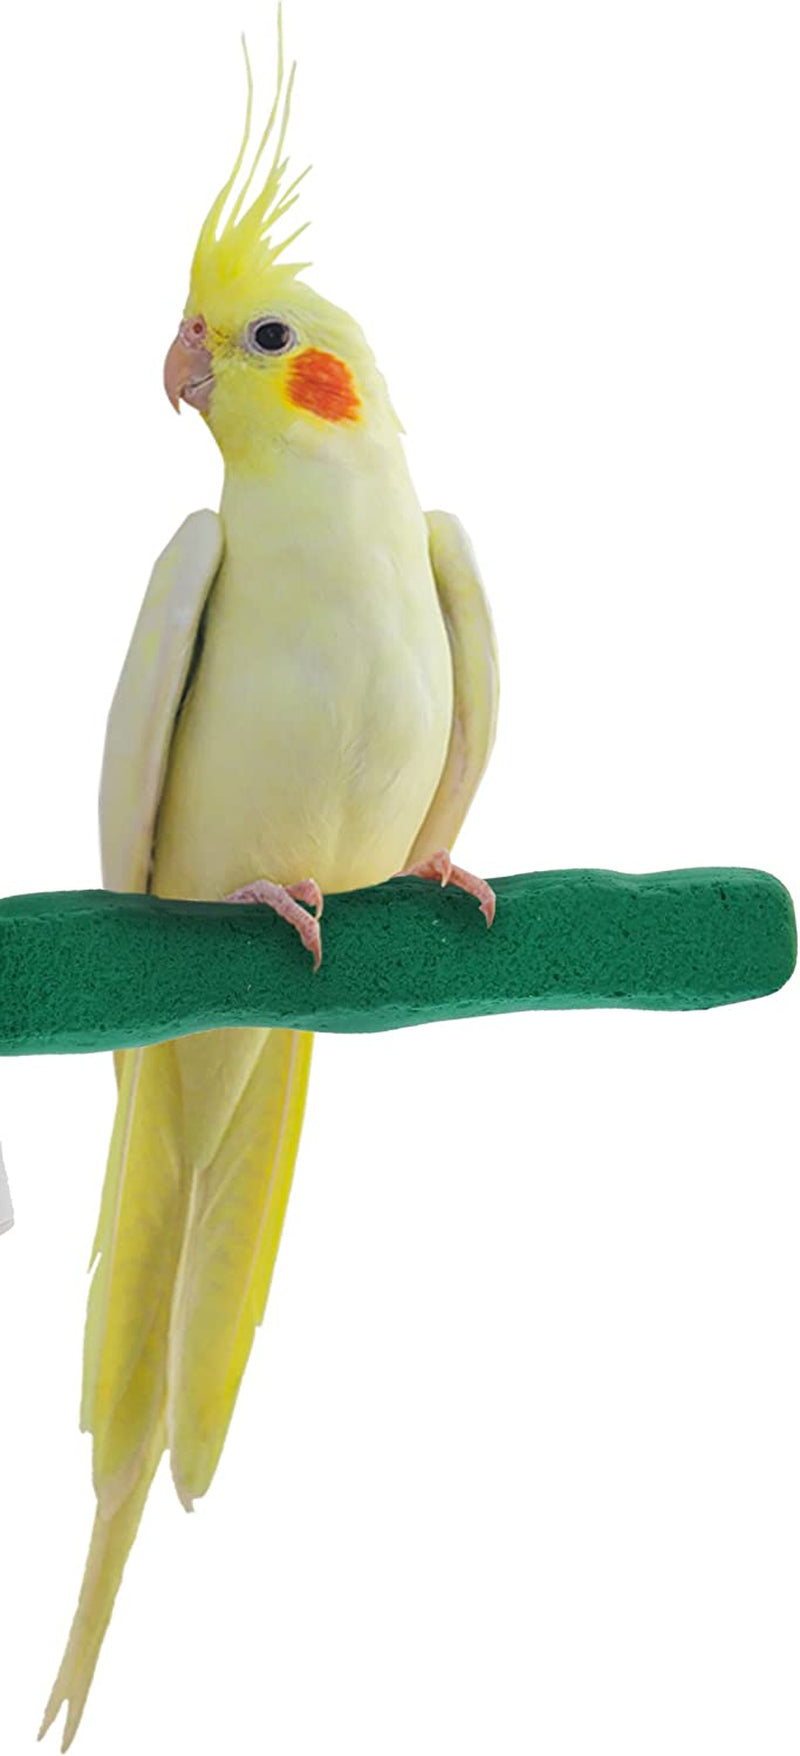 Sweet Feet and Beak Comfort Grip Safety Perch for Bird Cages - Patented Pumice Perch for Birds to Keep Nails and Beaks in Top Condition - Safe Easy to Install Bird Cage Accessories - M 8.5" Animals & Pet Supplies > Pet Supplies > Bird Supplies Sweet Feet and Beak Green Small 6.5" 